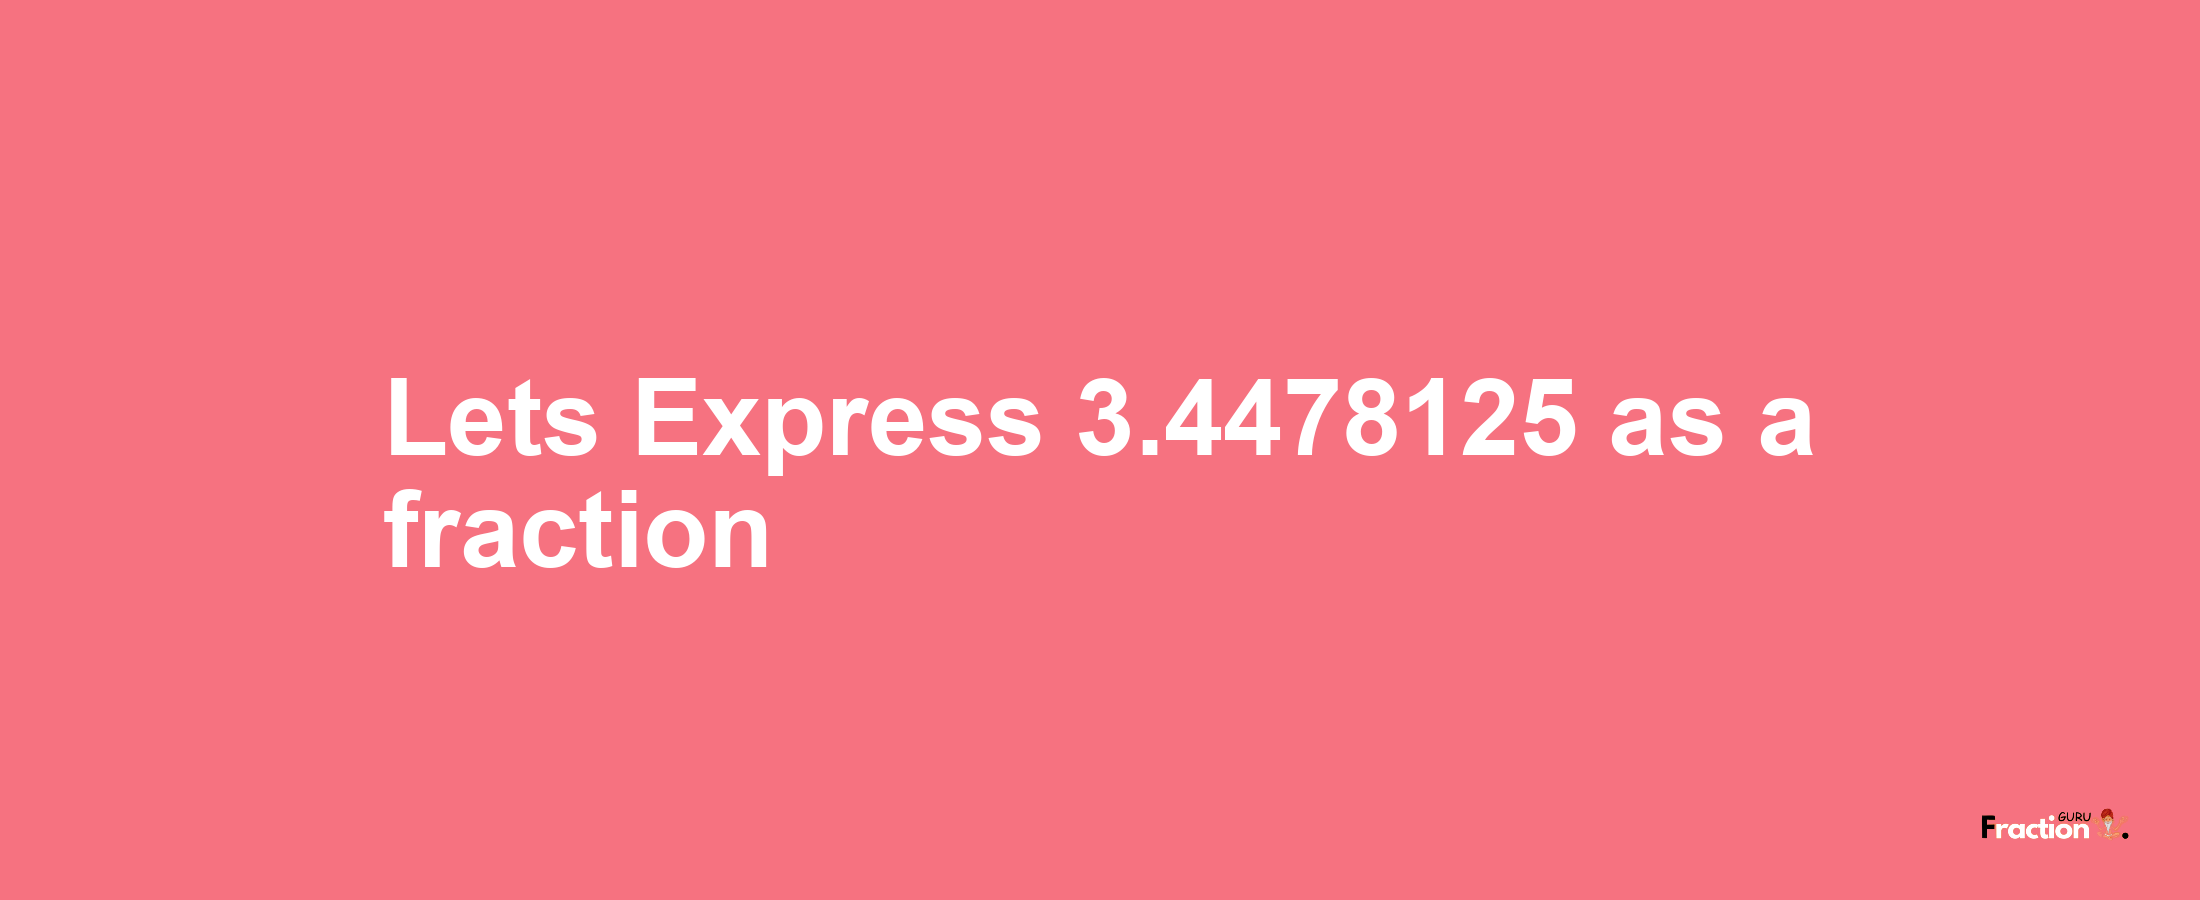 Lets Express 3.4478125 as afraction